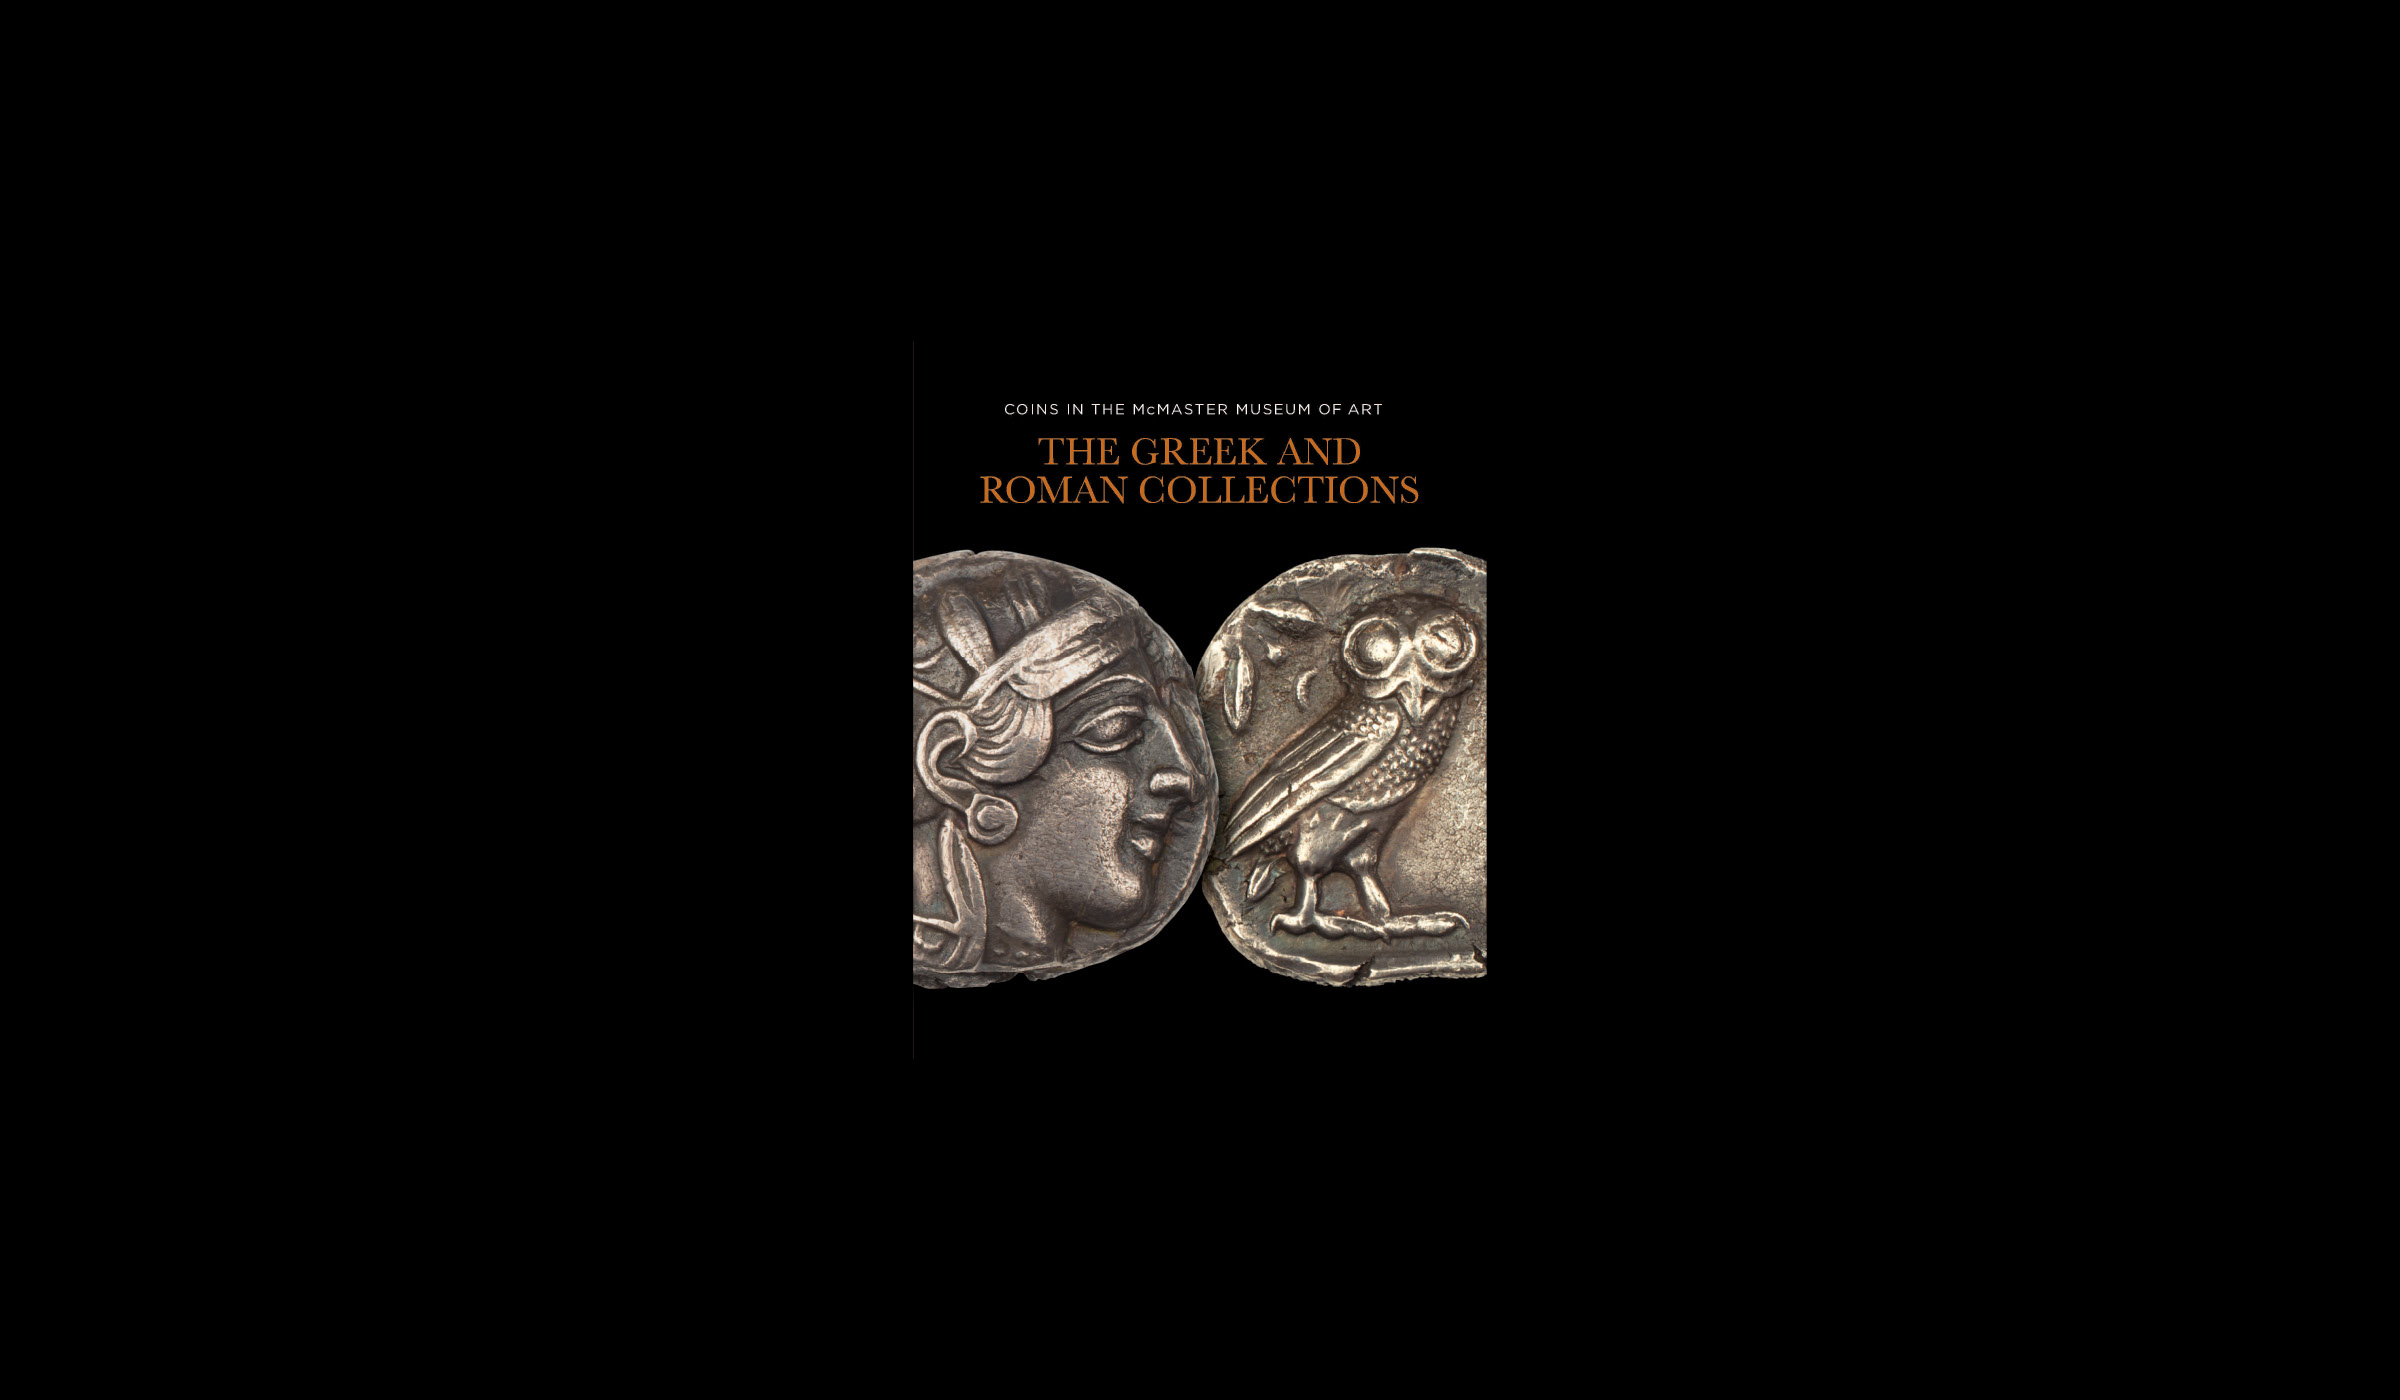 Coins in the McMaster Museum of Art: The Greek and Roman Collections